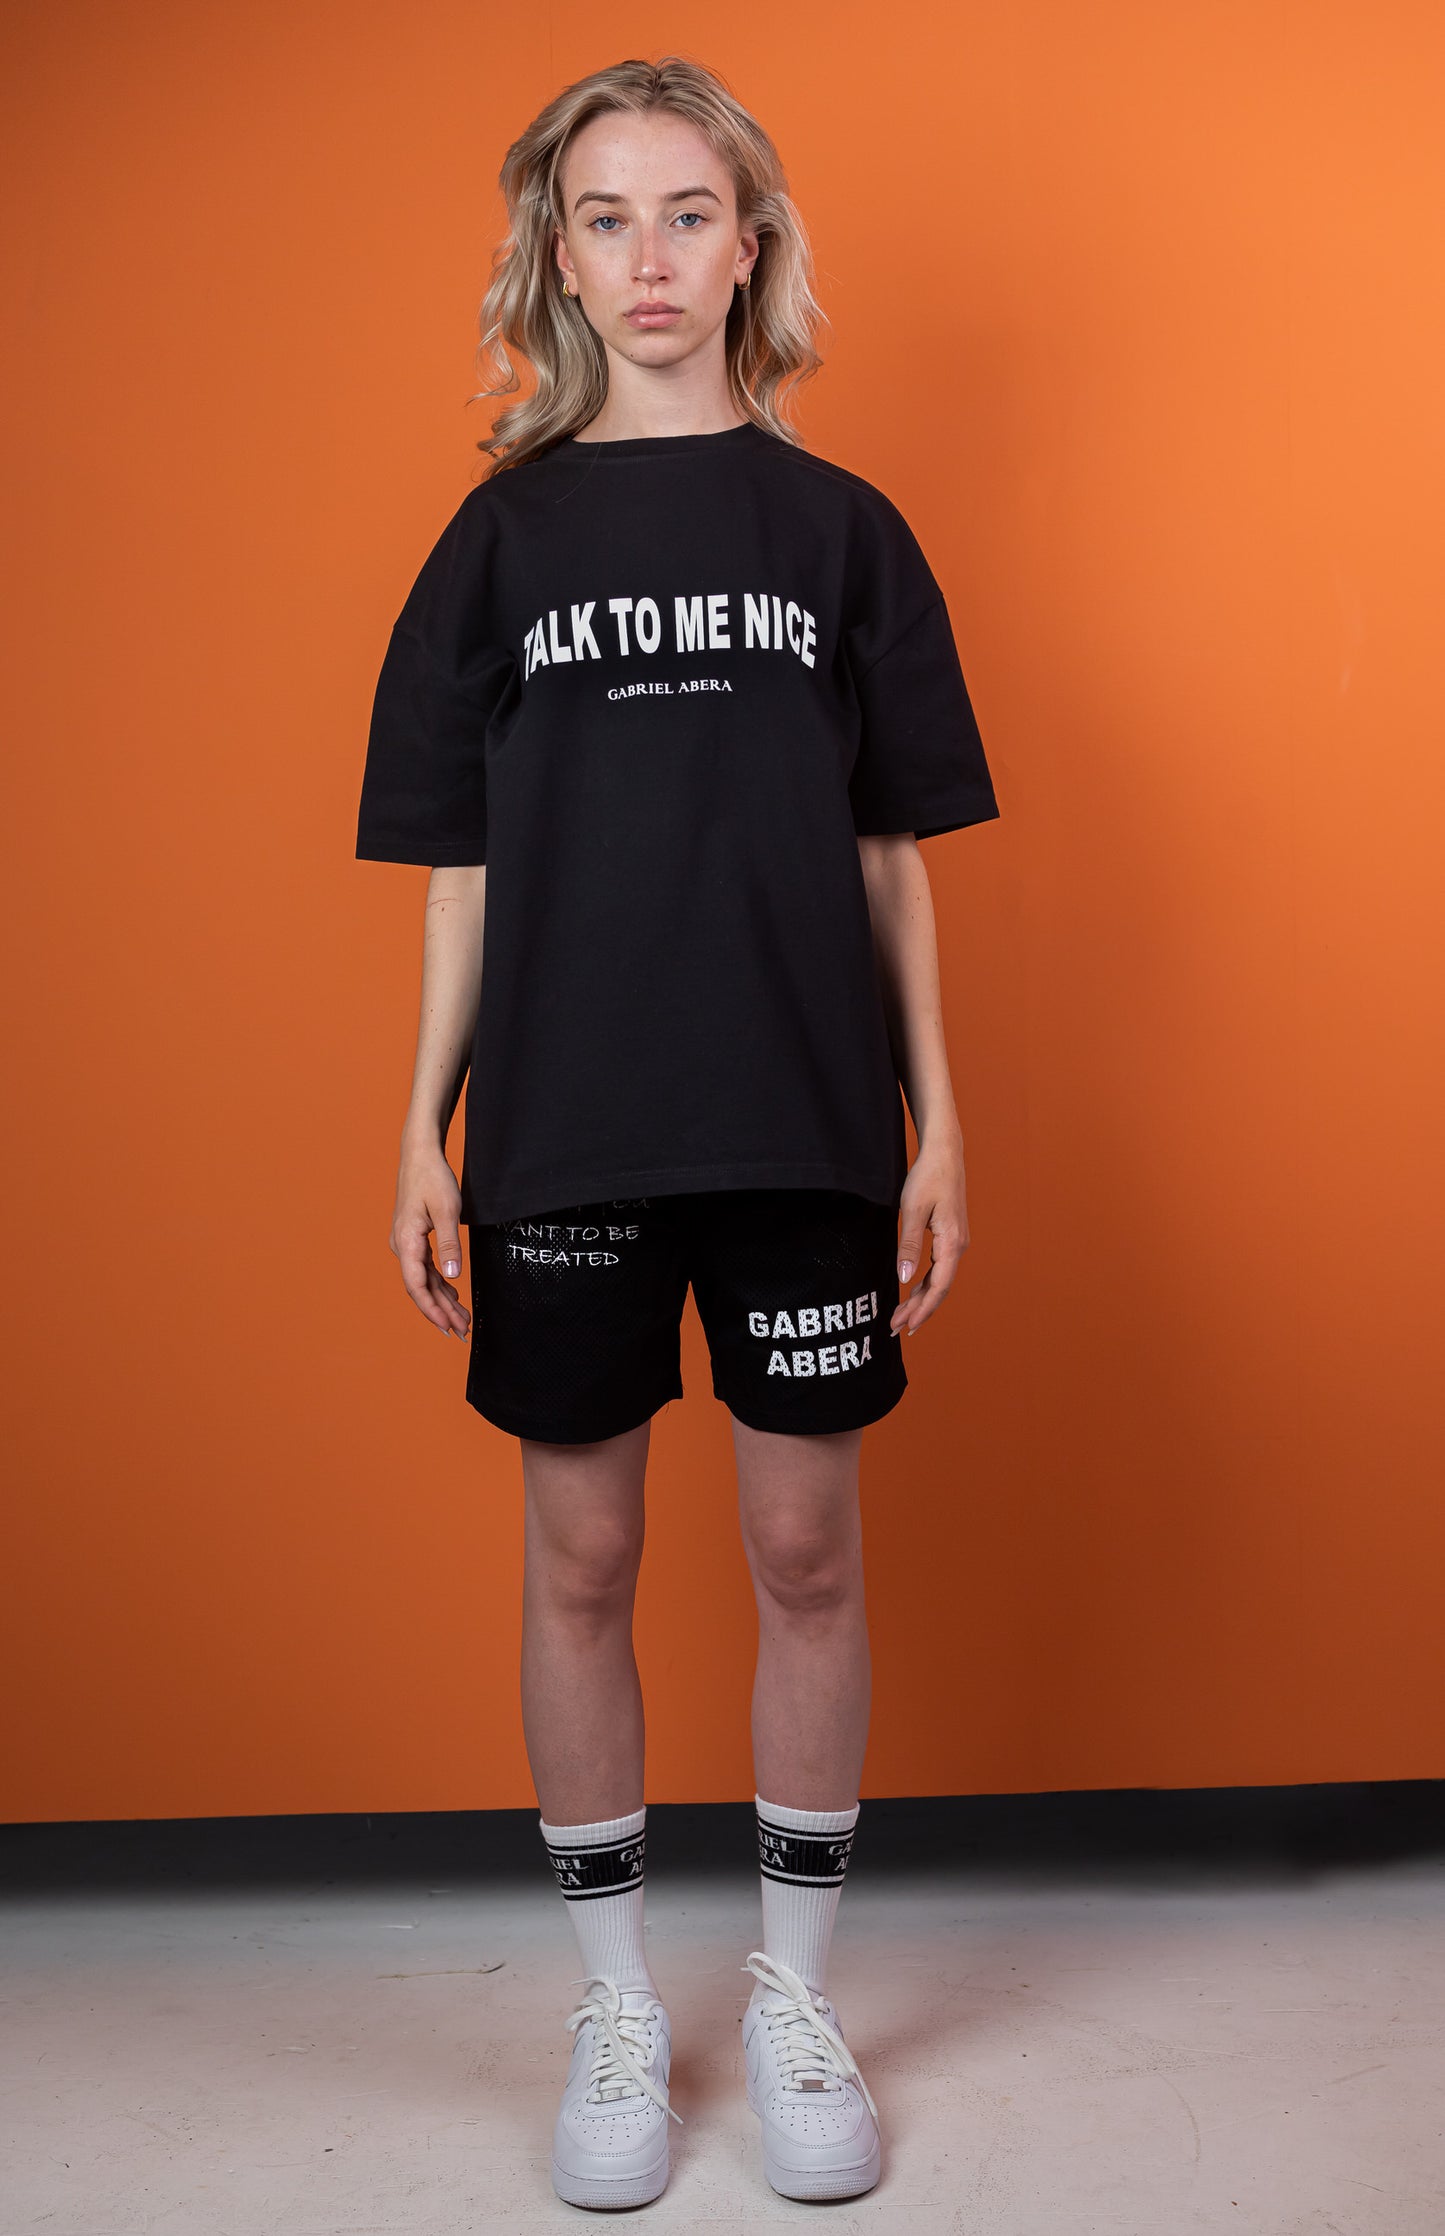 Female model wearing a Black oversize tshirt with white talk to me nice design on the front